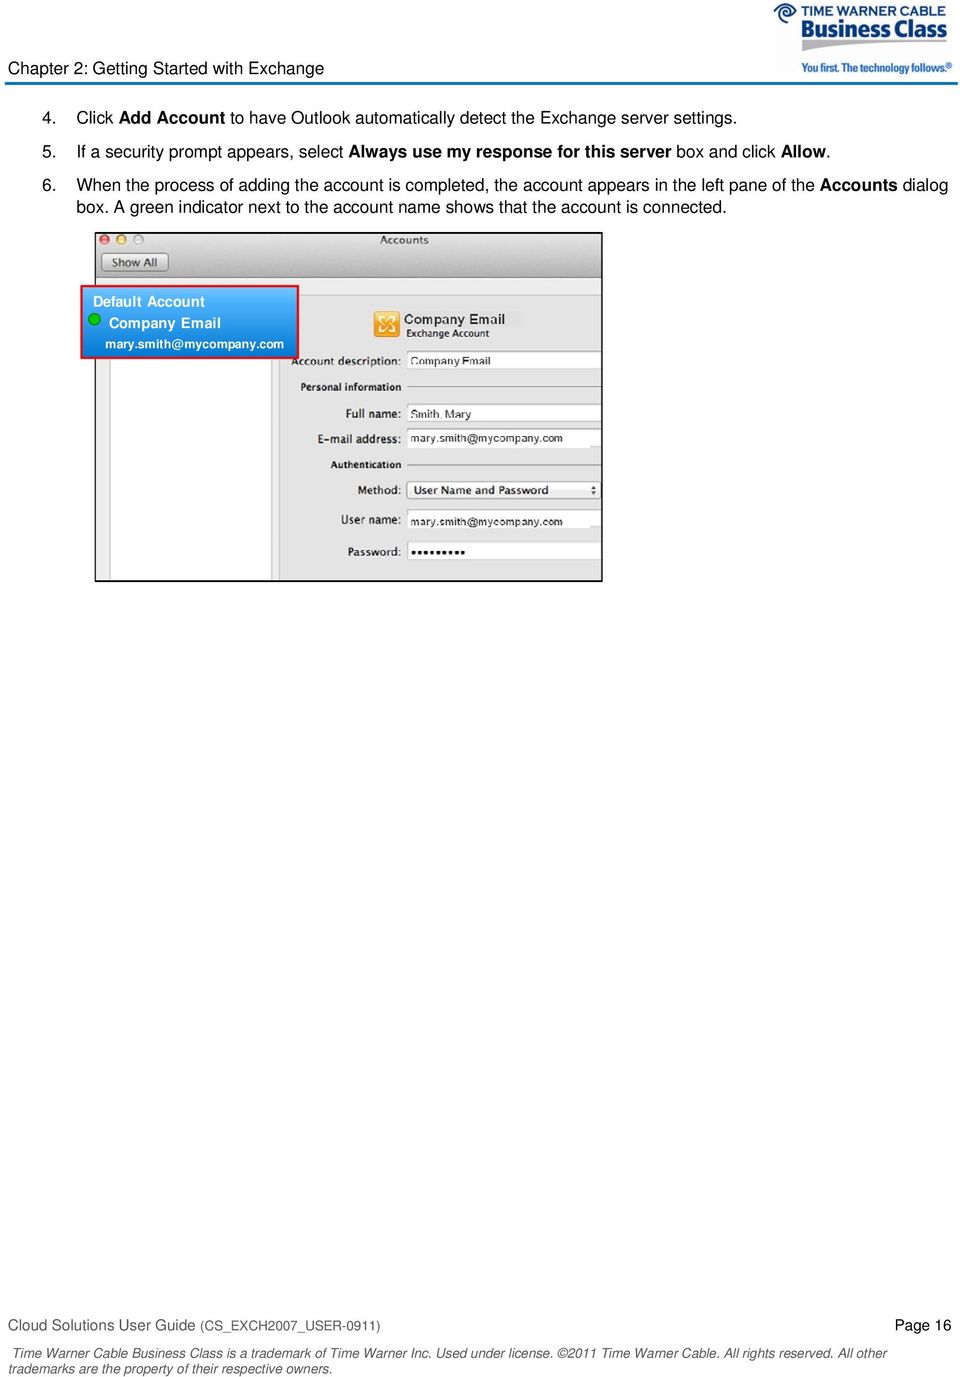 When the process of adding the account is completed, the account appears in the left pane of the Accounts dialog box.